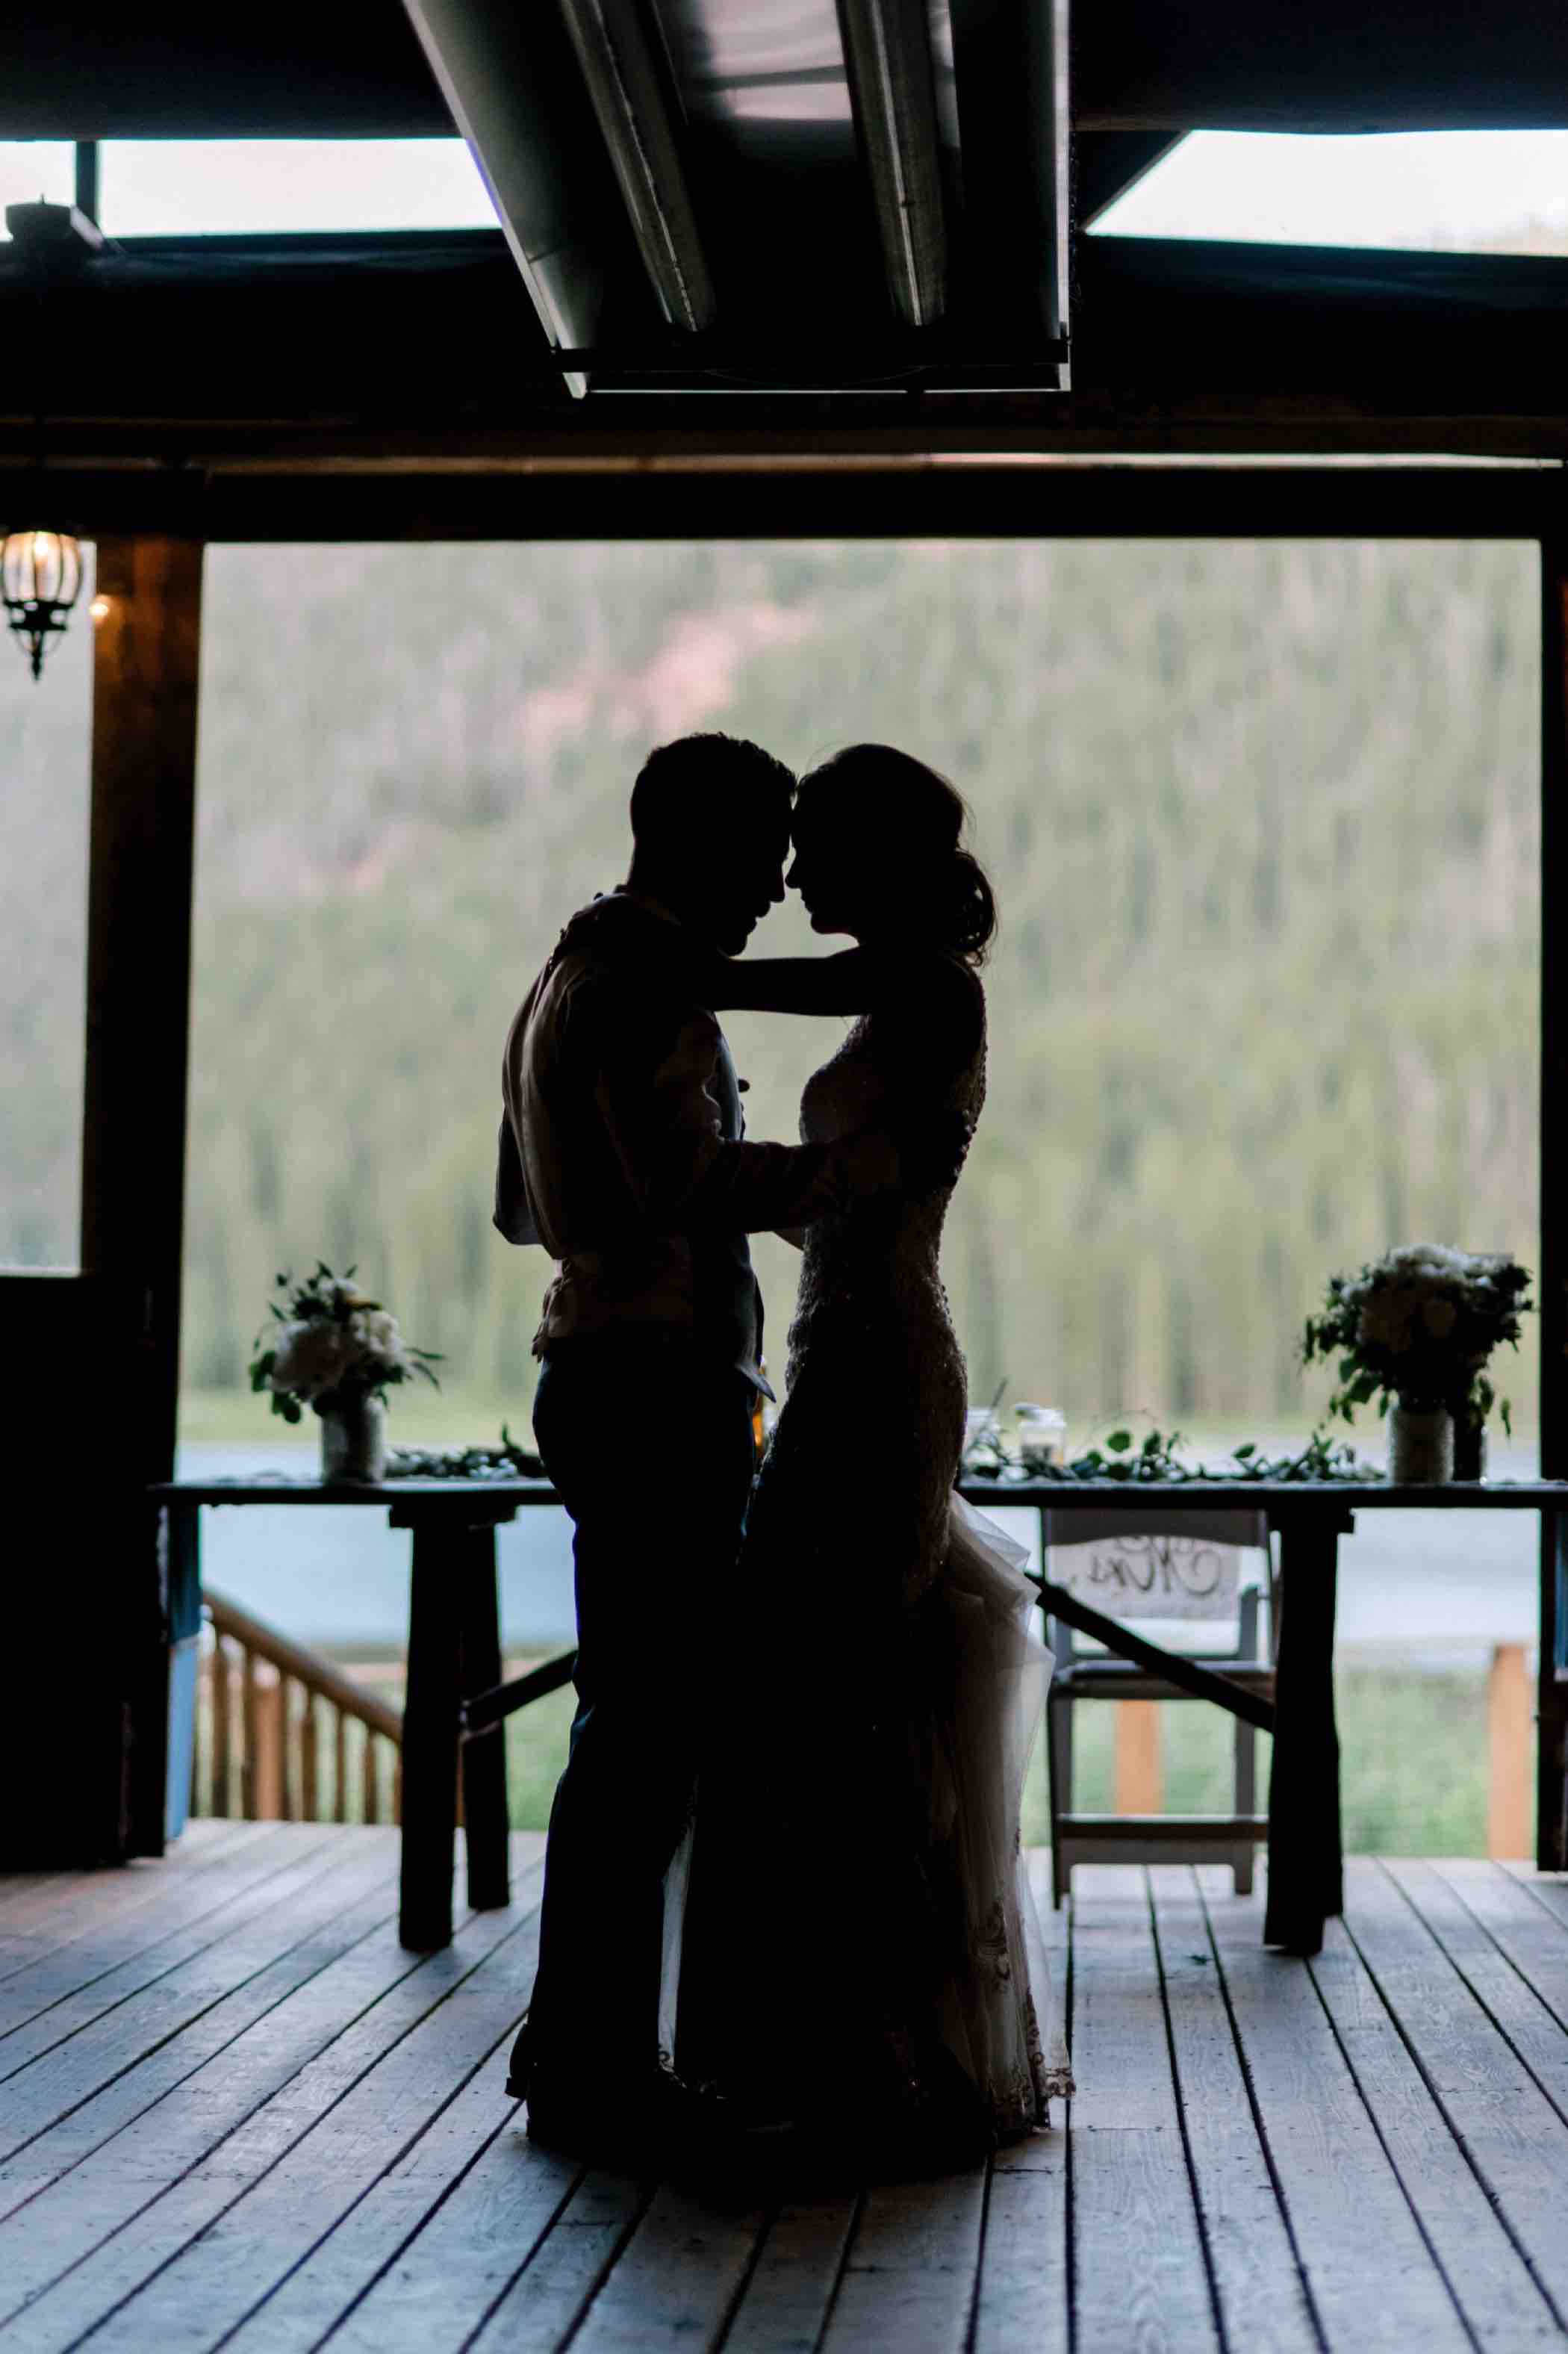 Bride and groom's first dance during their wedding reception at Piney River Ranch in Vail, Colorado. Photo by Ali and Garrett, Romantic, Adventurous, Nostalgic Wedding Photographers.